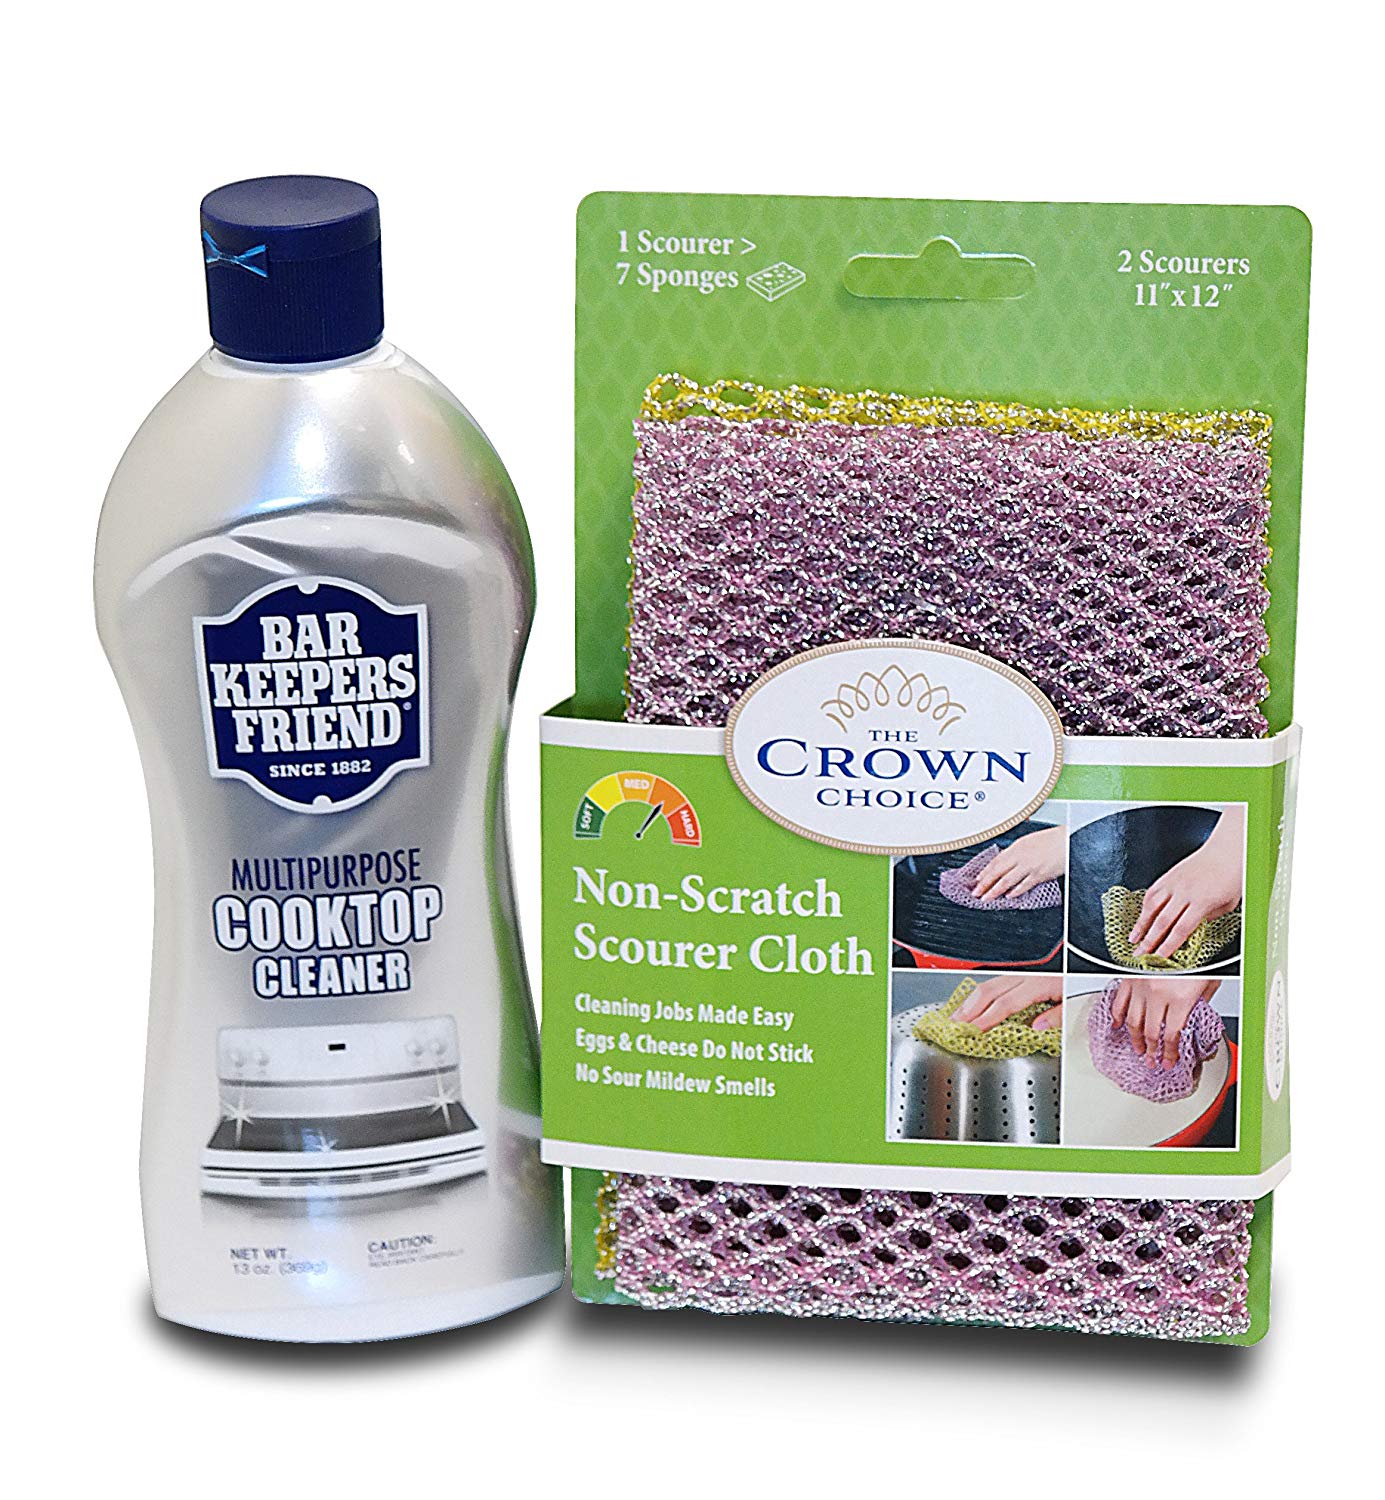 BAR KEEPERS FRIEND Cooktop Cleaner Kit